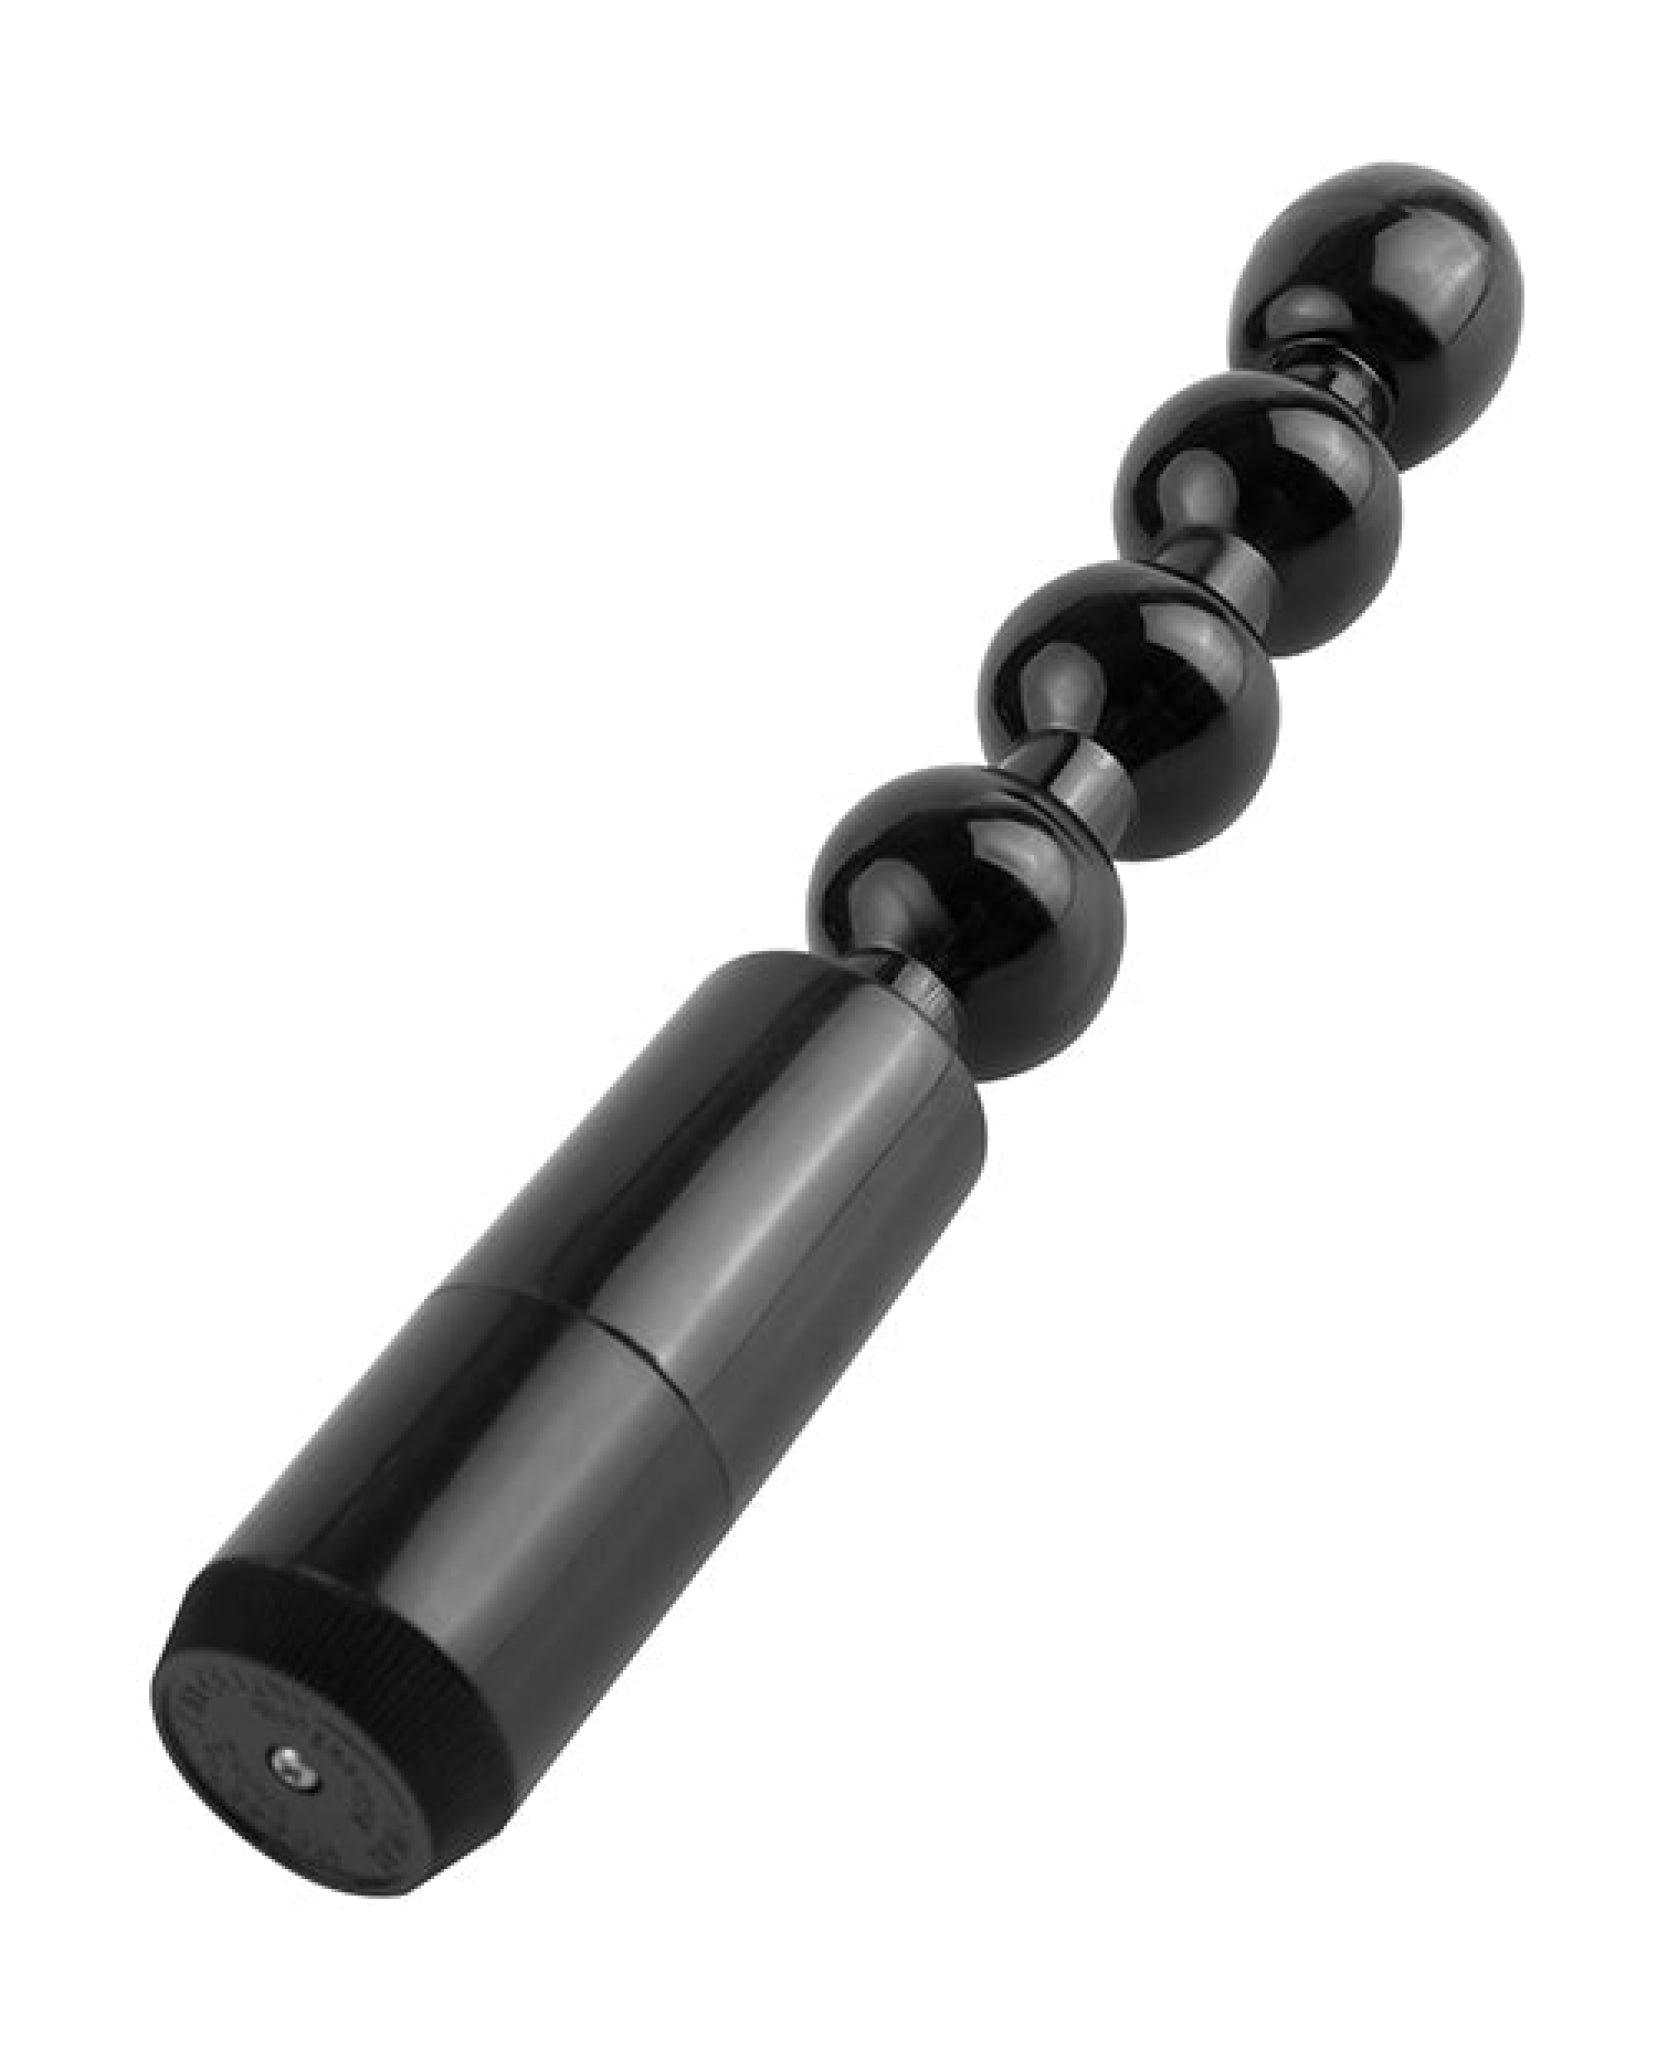 Anal Fantasy Collection Power Beads - Black Pipedream®